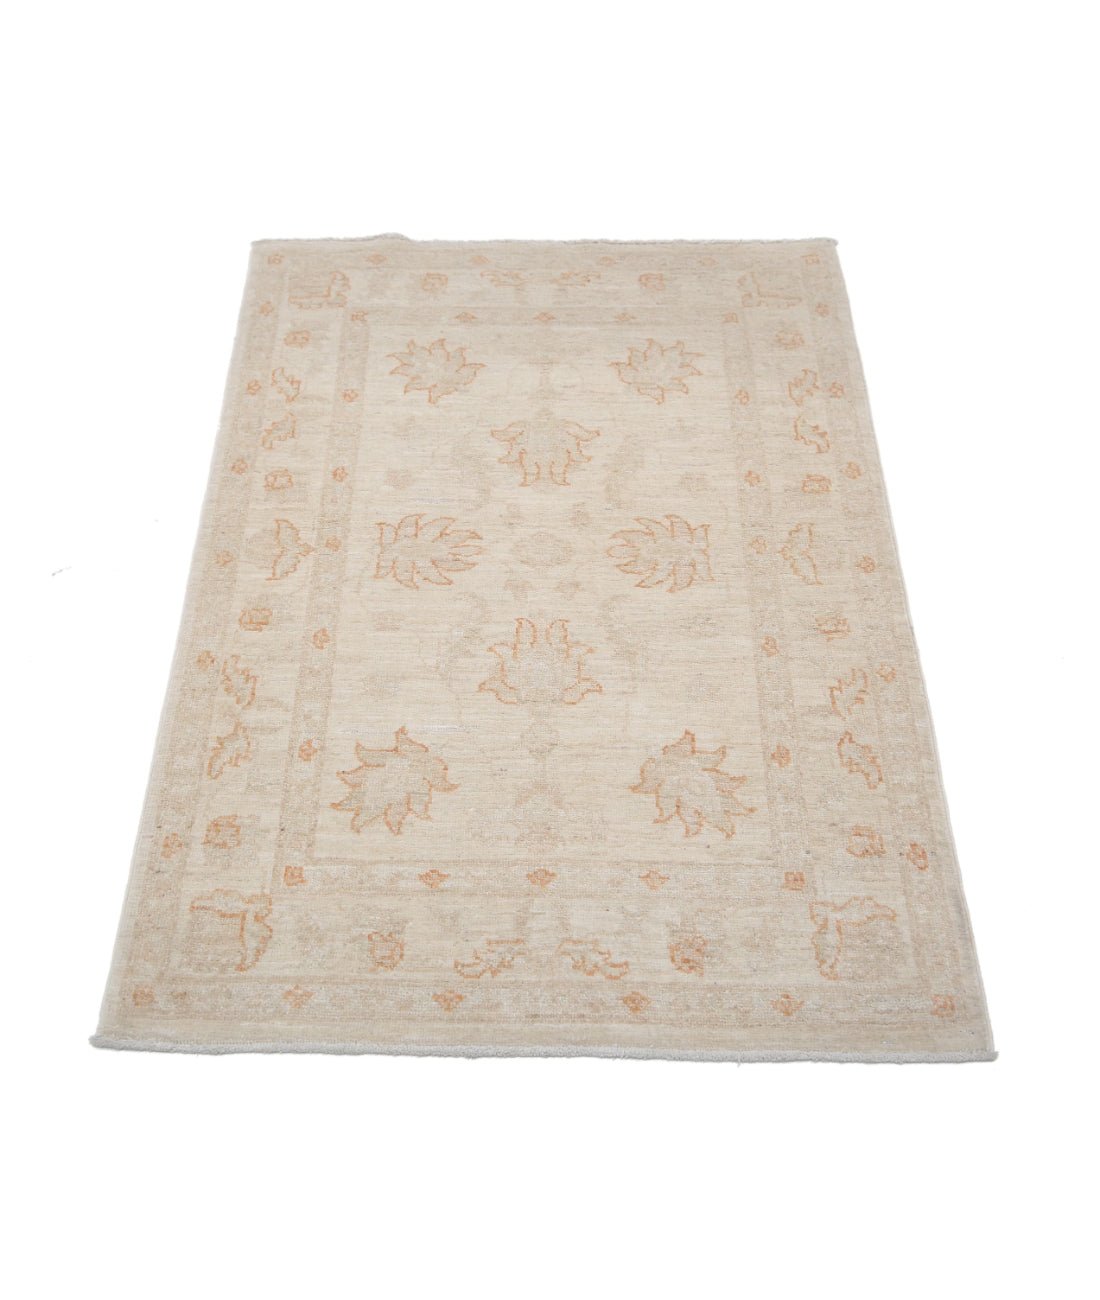 Hand Knotted Serenity Wool Rug - 2'7'' x 3'10'' 2'7'' x 3'10'' (78 X 115) / Ivory / Ivory